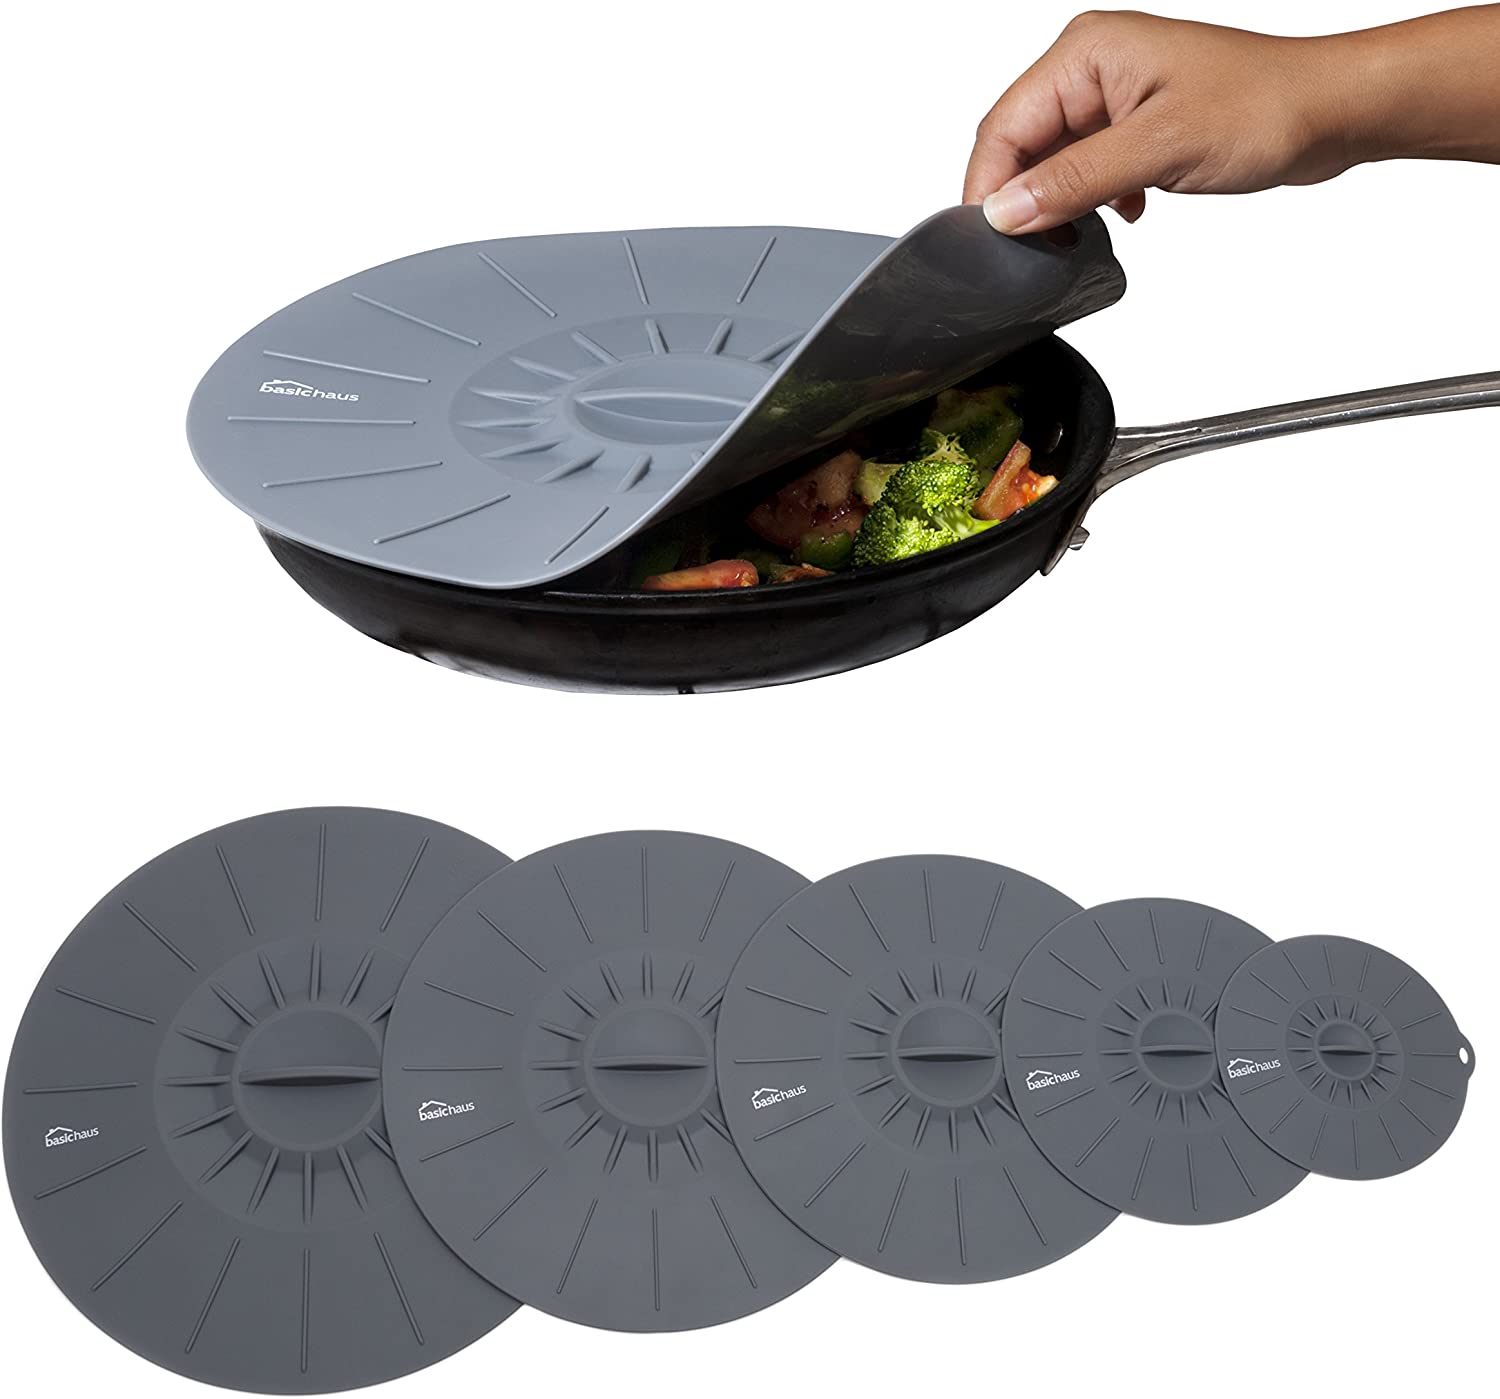 Basic Haus Microwave Covers Silicone Lids